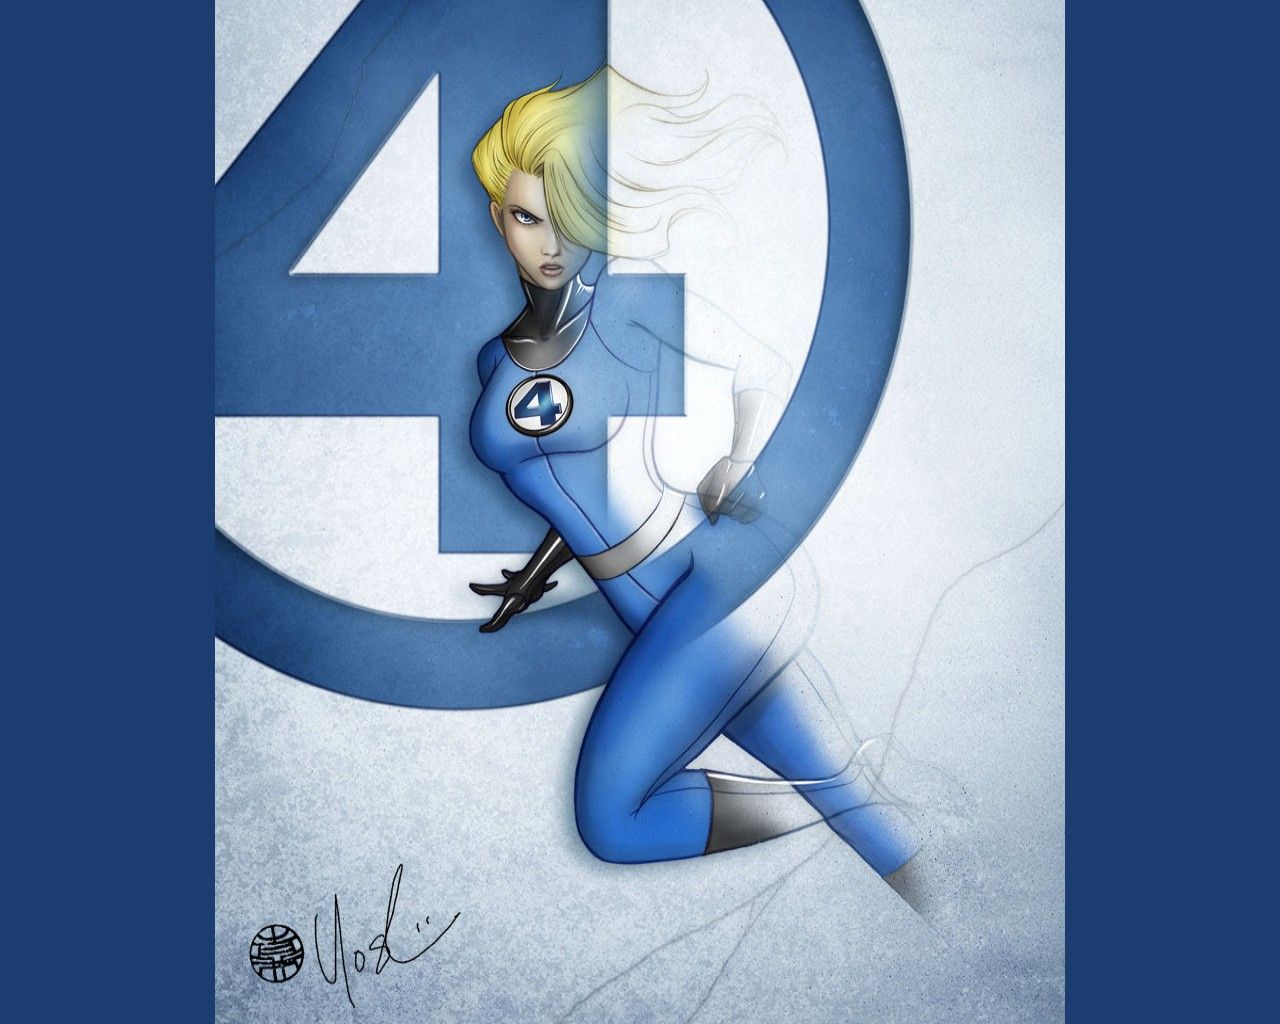 Invisible Woman Wallpaper. Invisible Man Wallpaper, Invisible Jet Wonder Woman Wallpaper and Invisible Vampire Background